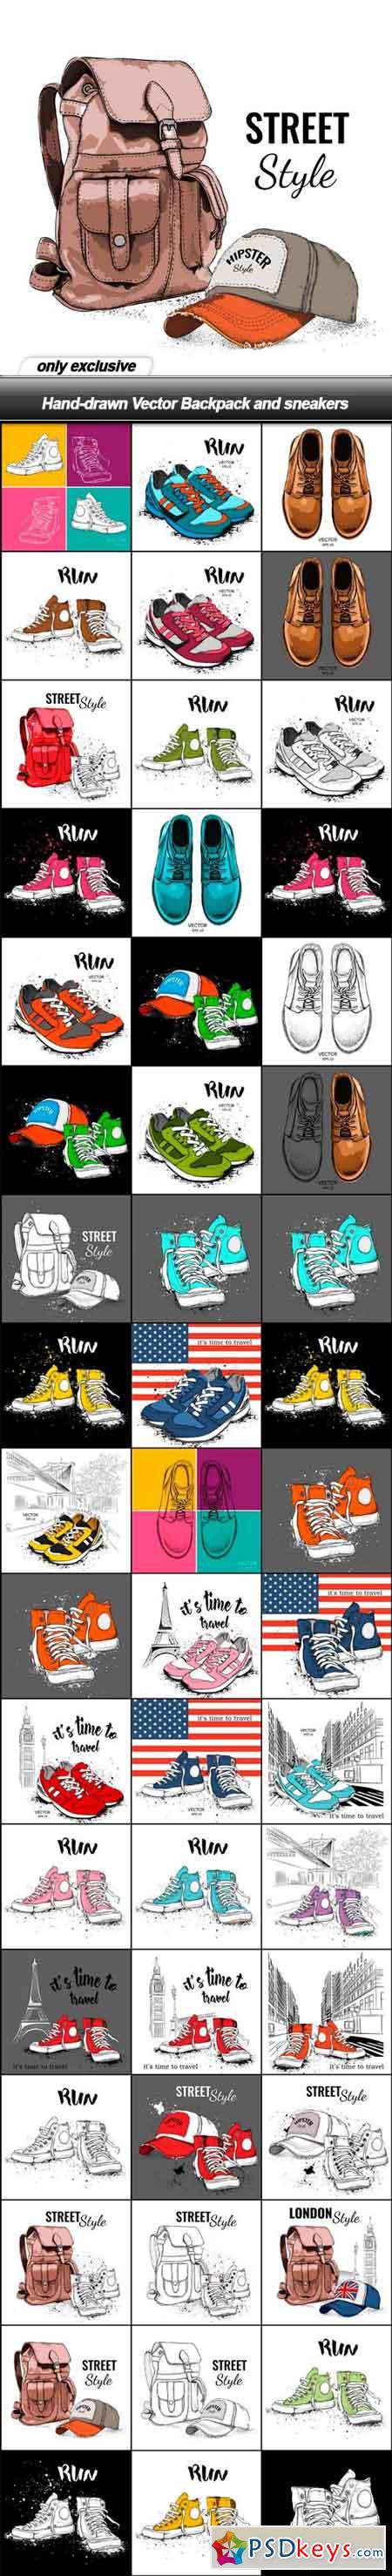 Hand-drawn Vector Backpack and sneakers - 51 EPS